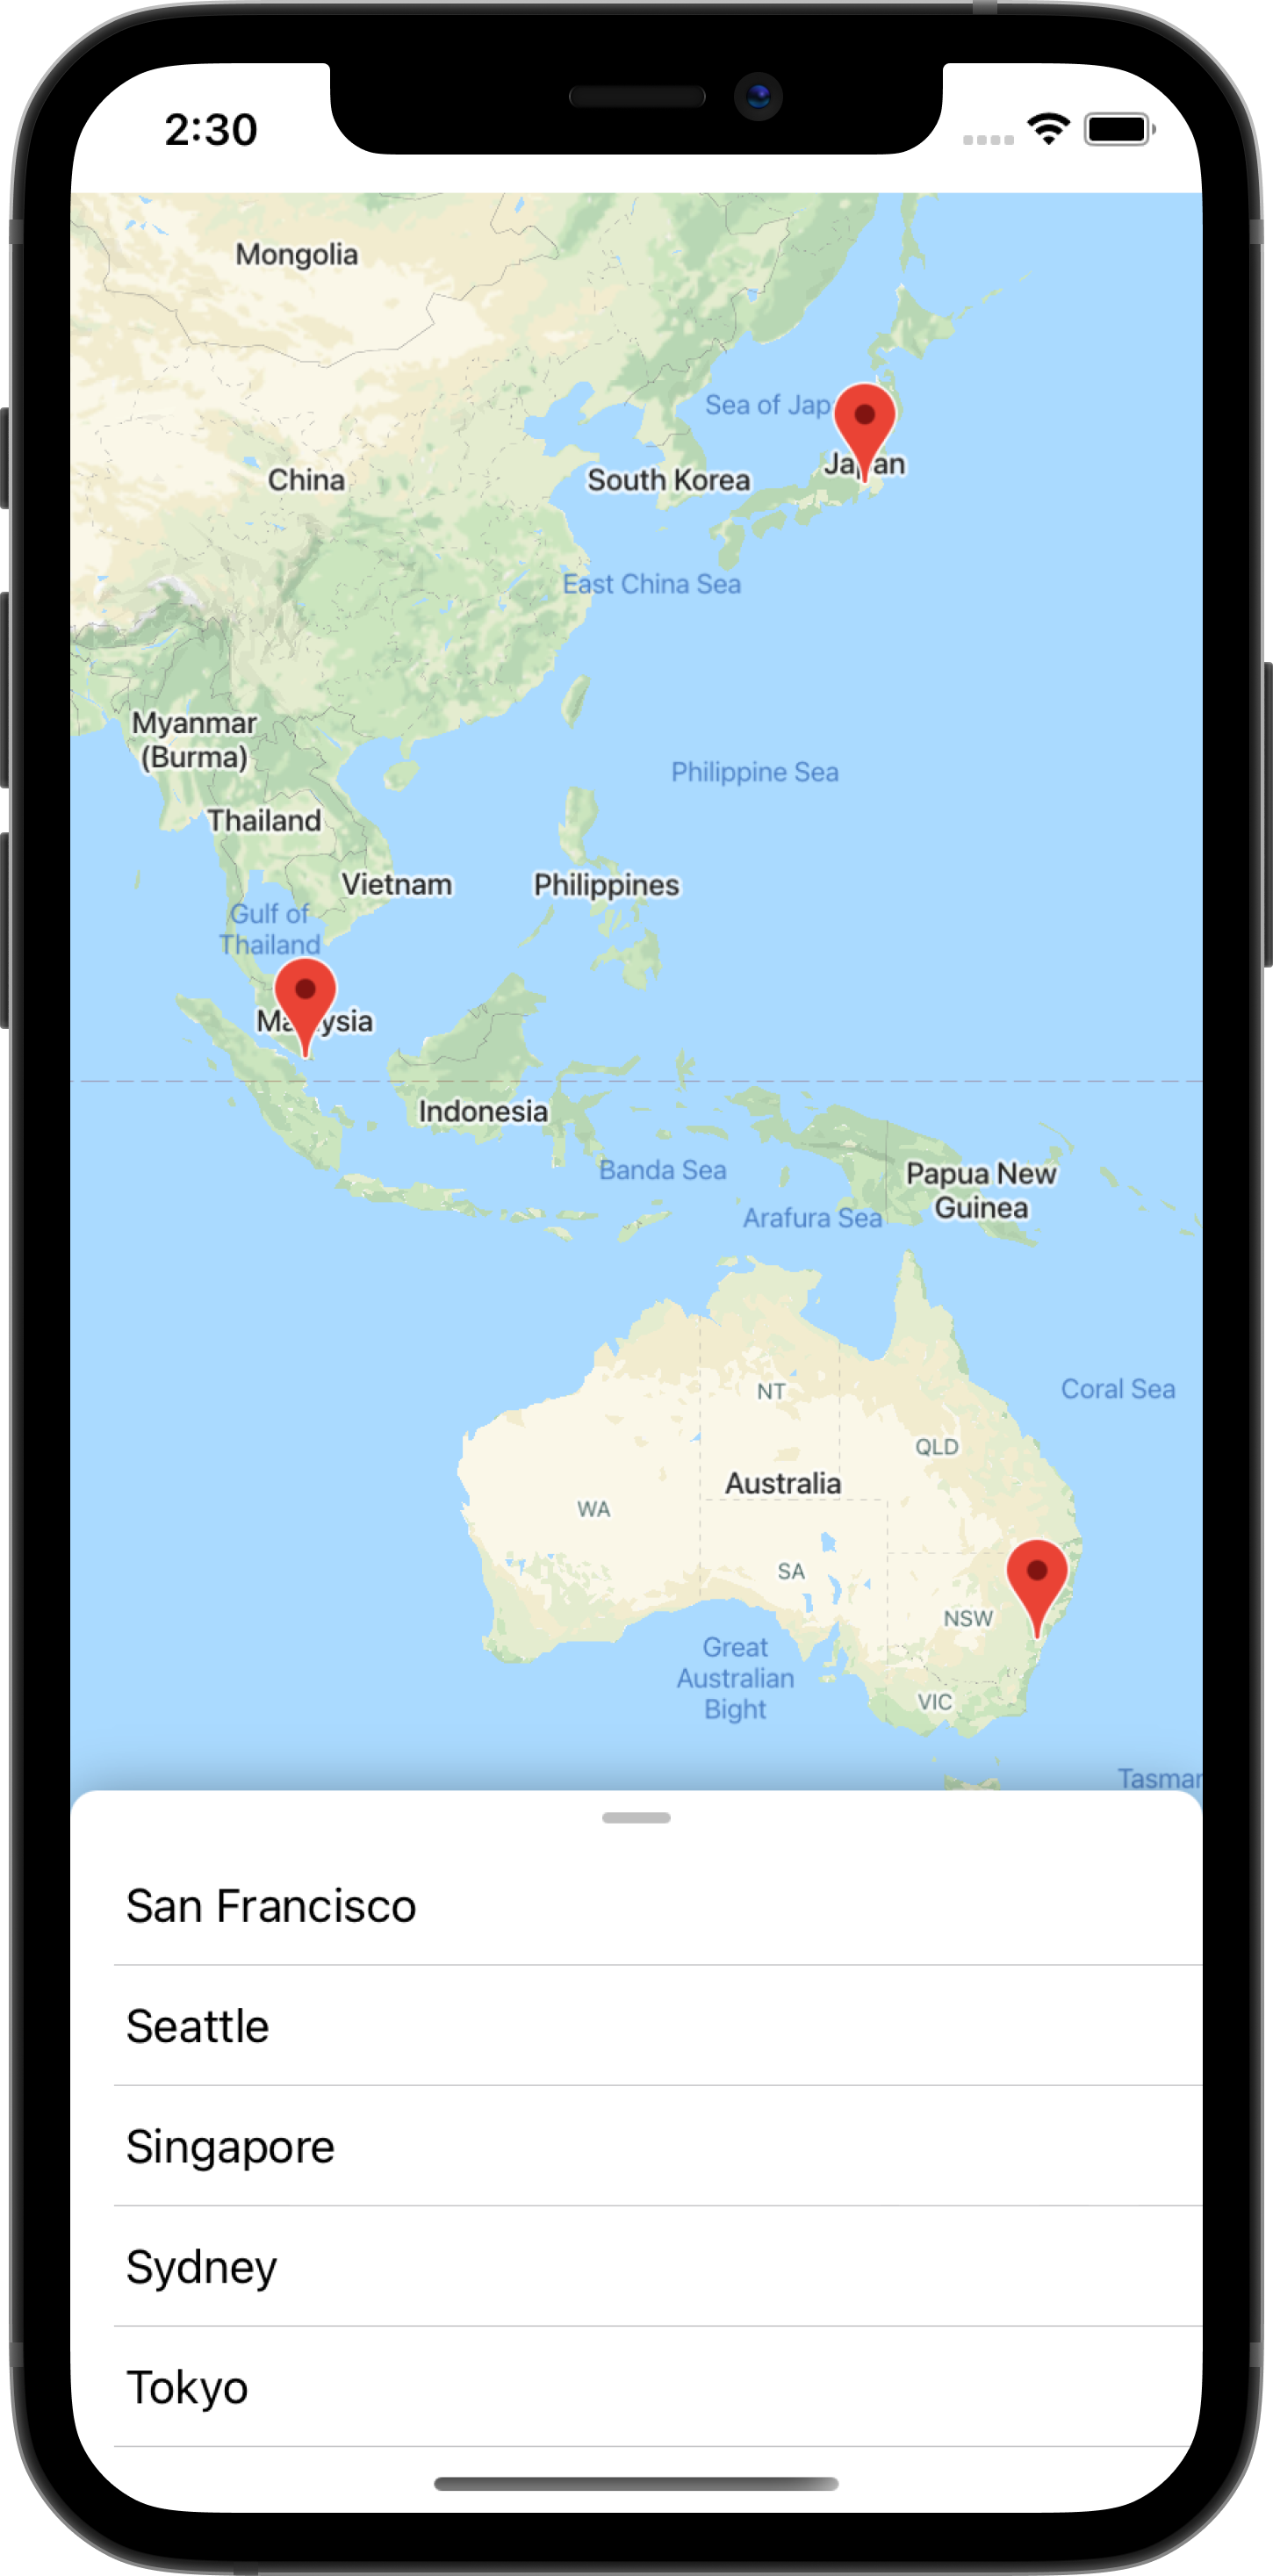 Add a map to your iOS app with SwiftUI (Swift)